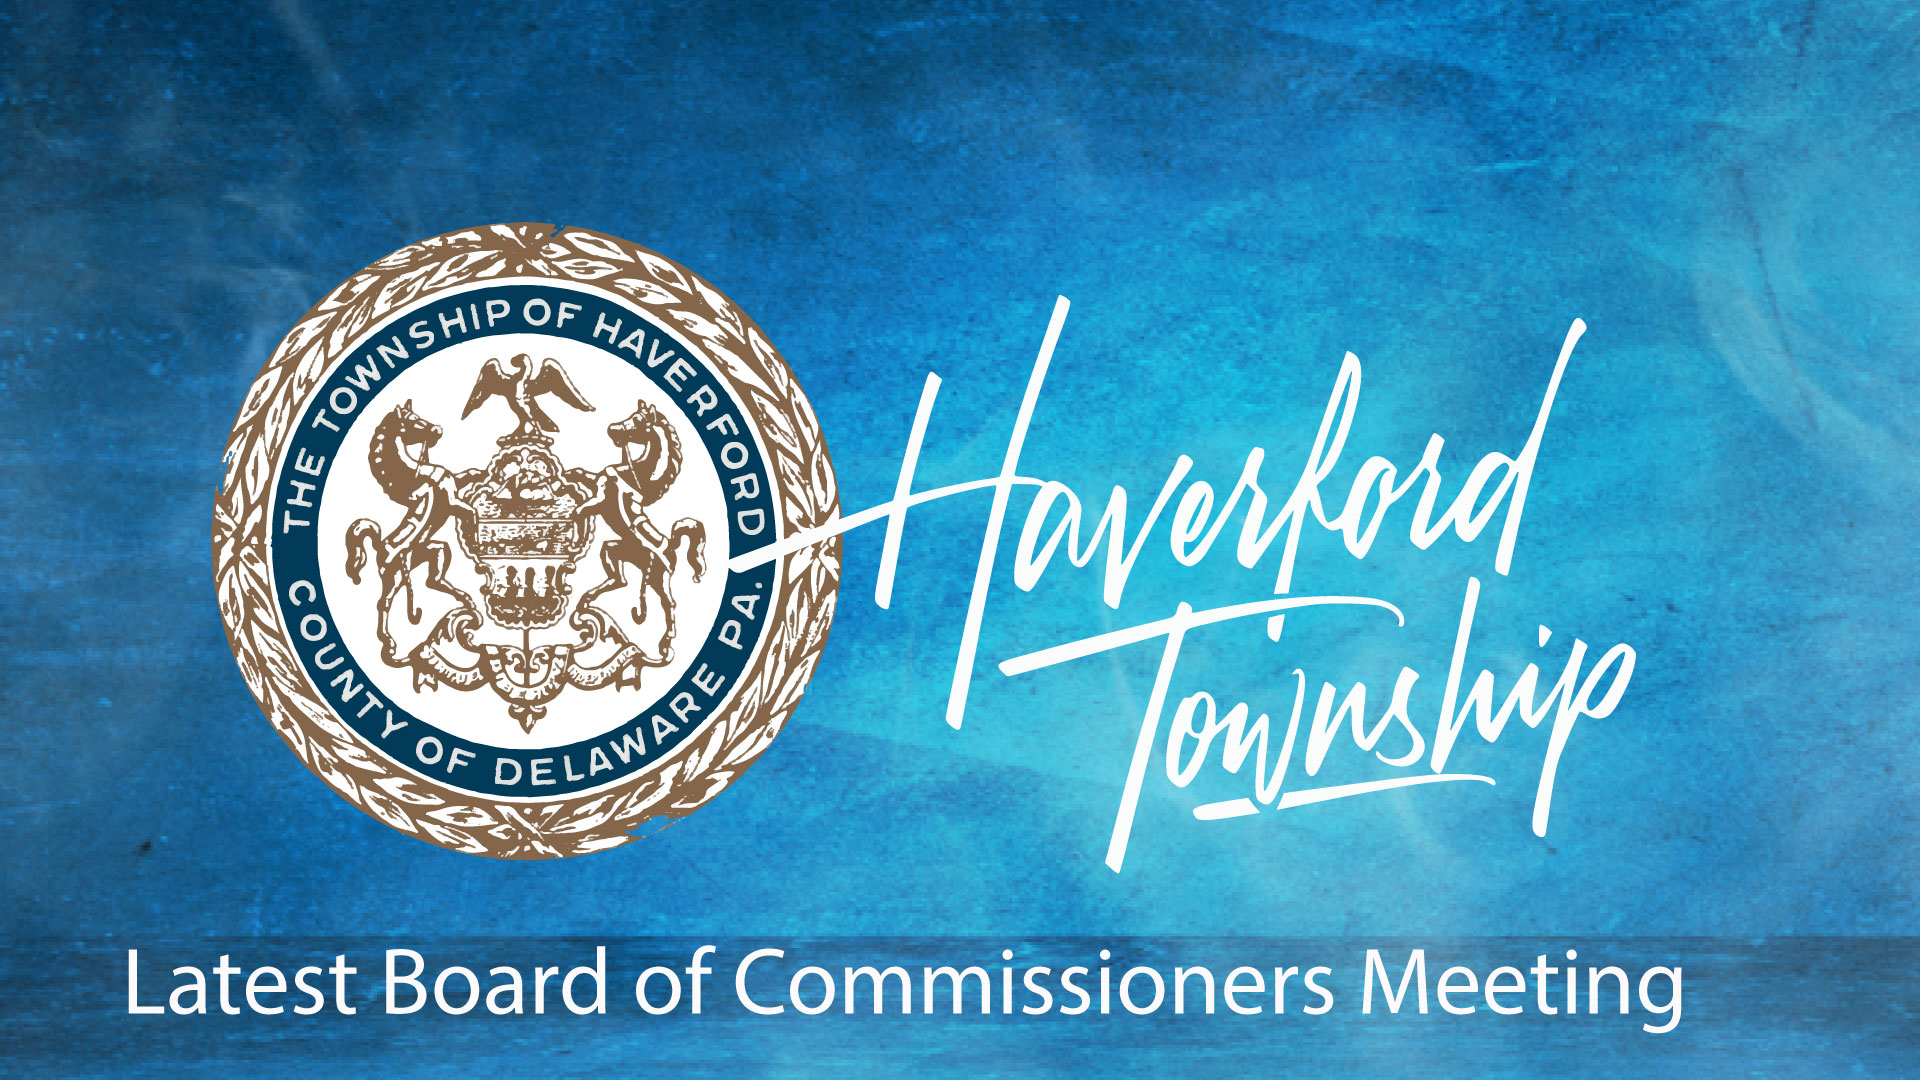 Latest Board of Commissioners Meeting